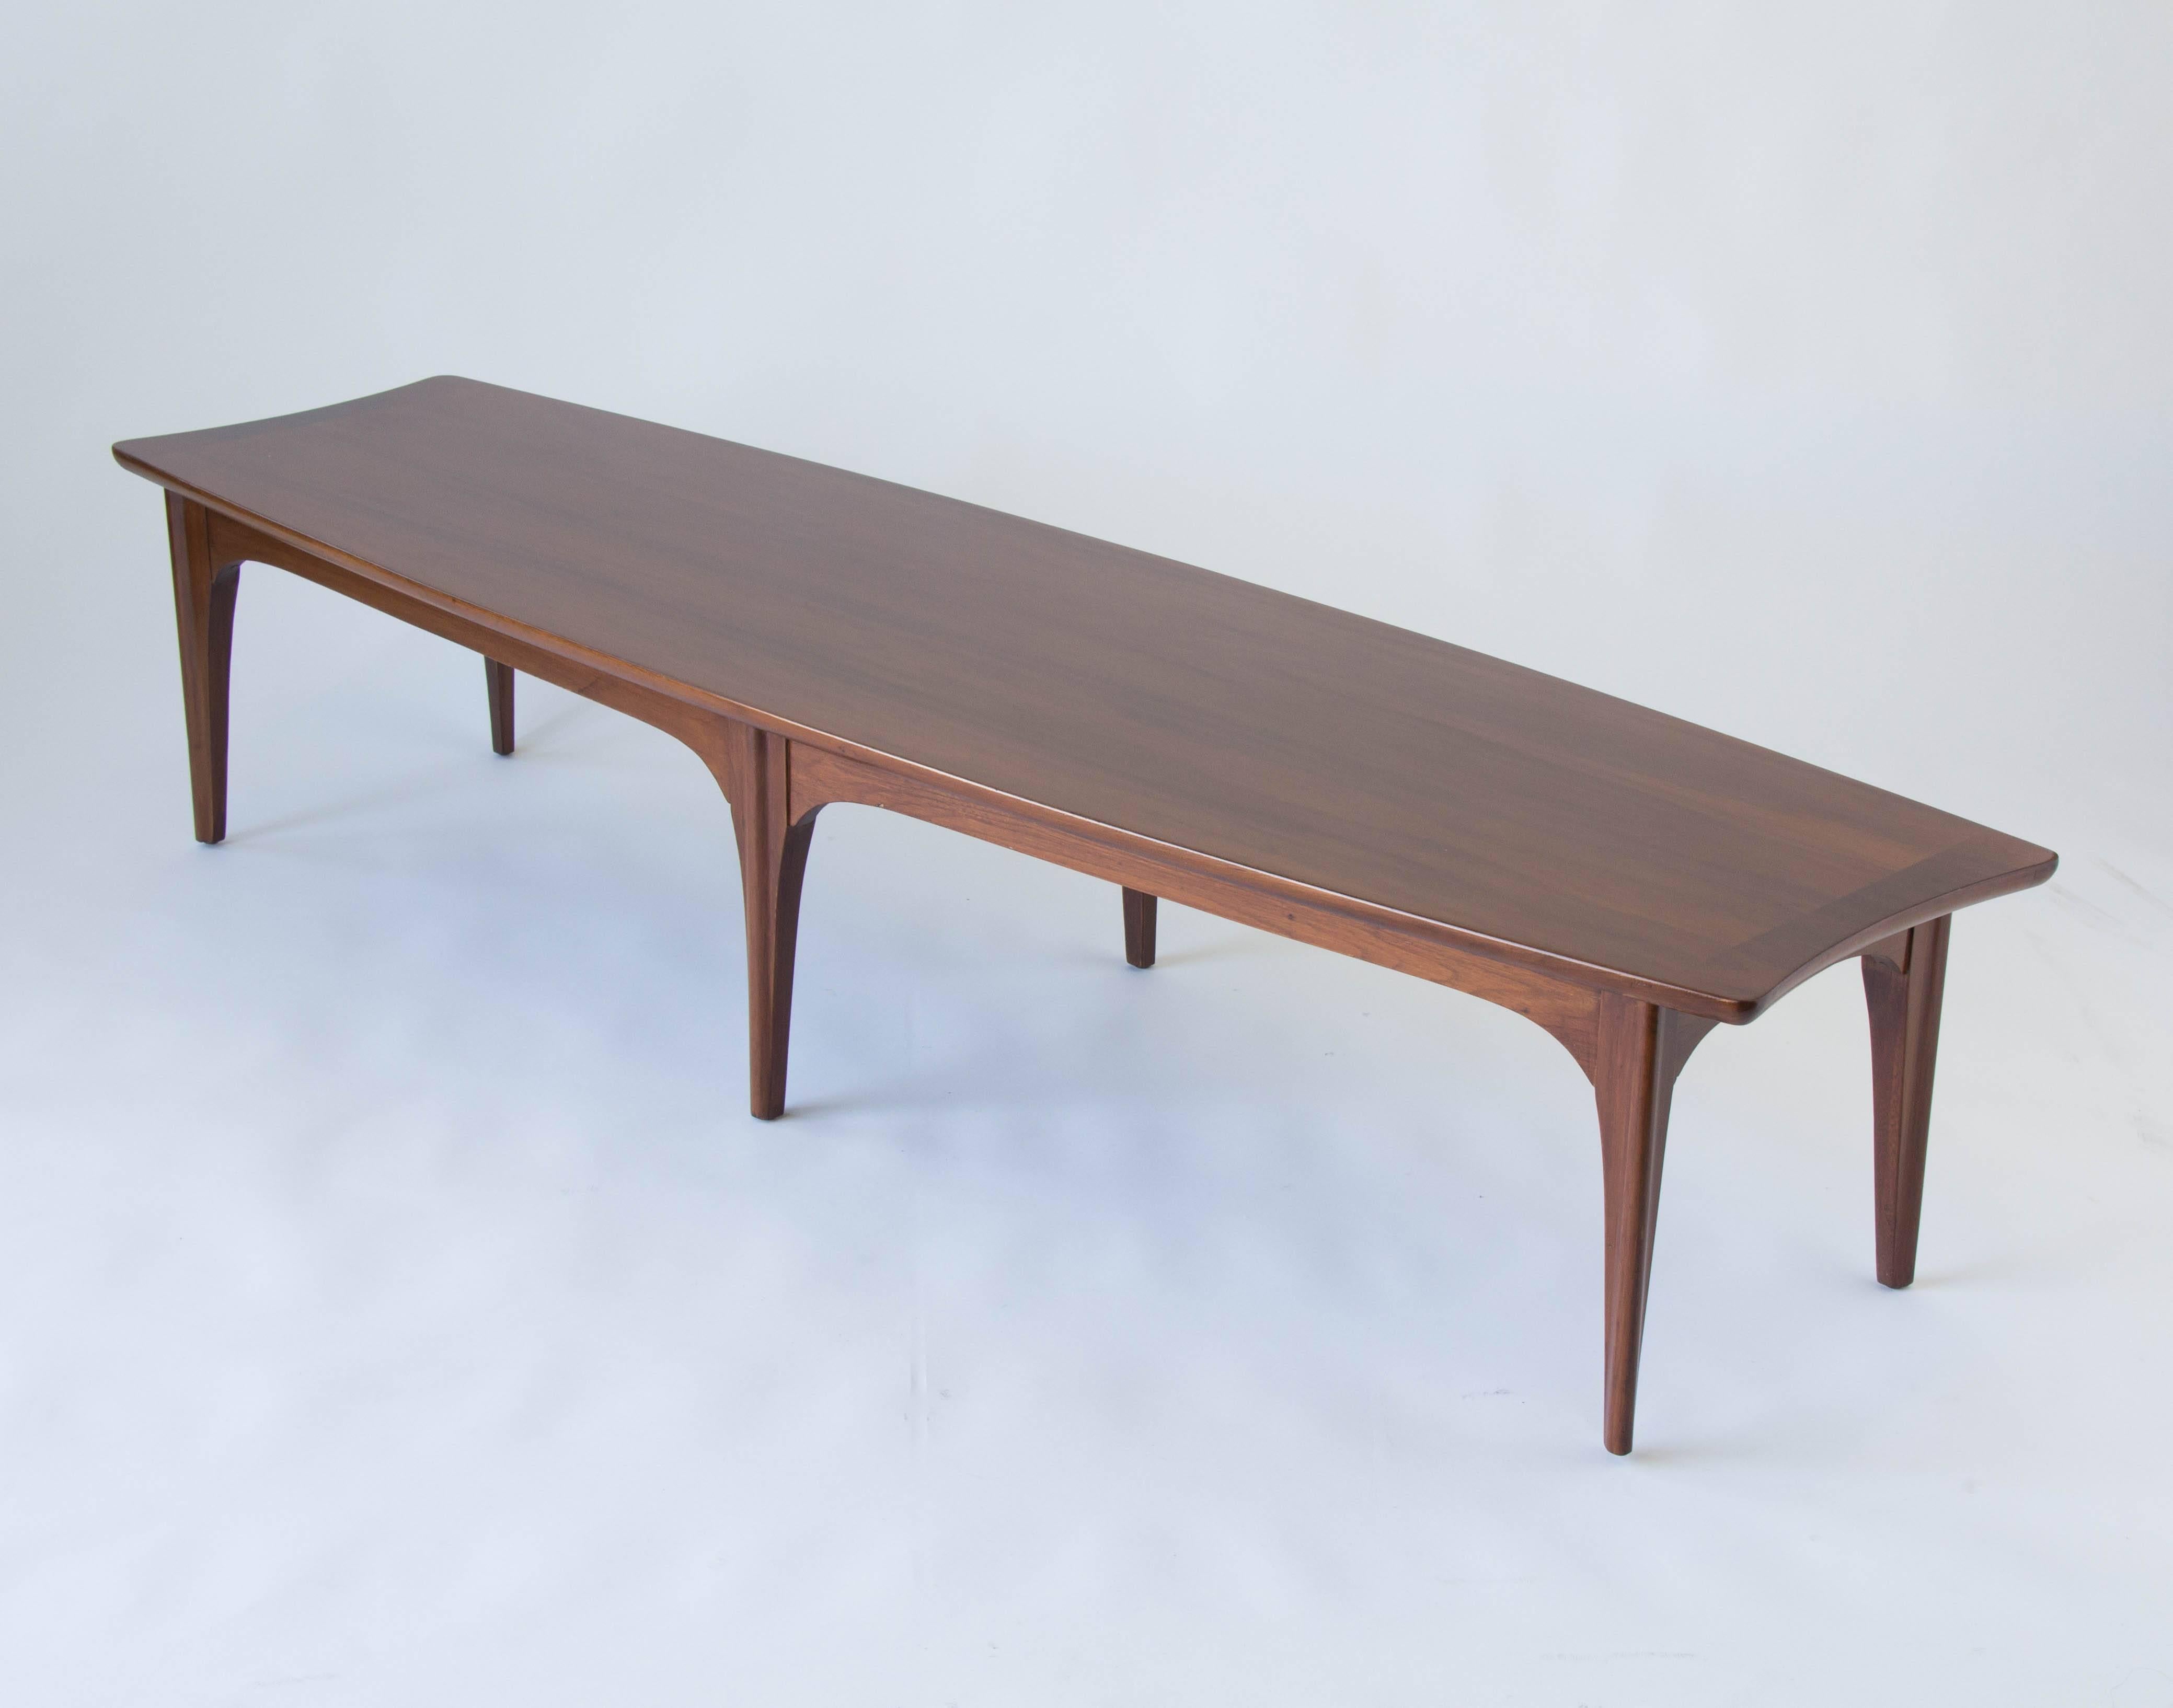 A long surfboard coffee table from the Kent Coffey 'Perspecta' line has six legs made in the U.S., circa 1960s. The traditional surfboard shape has been manipulated in incorporate peaked end pieces, inlaid with rosewood accents. 

Condition: Table